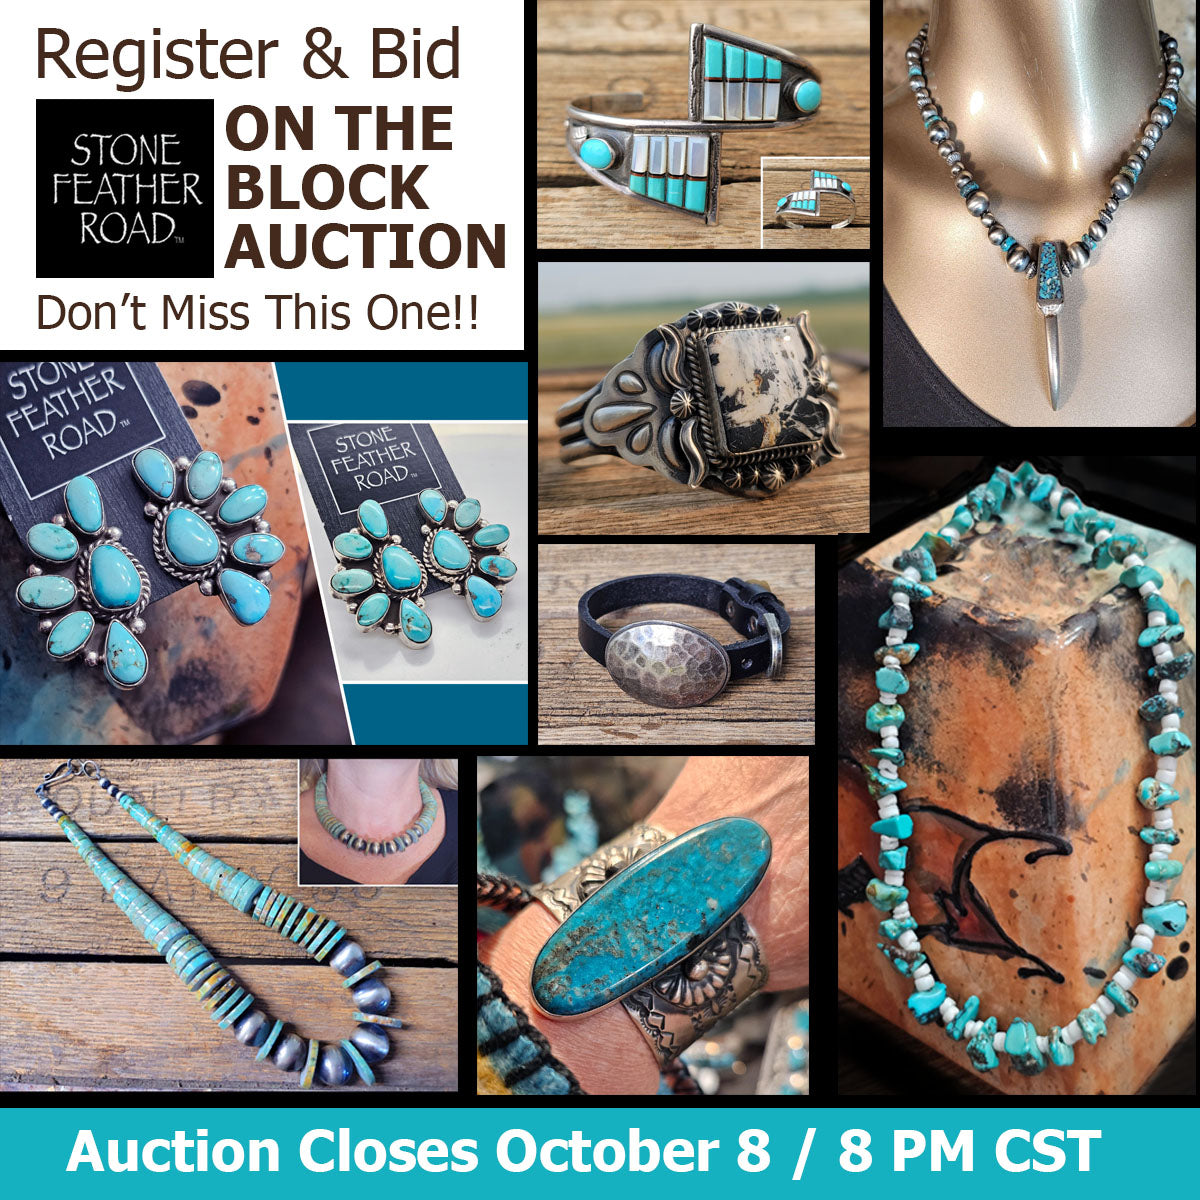 JOIN OUR WEEKLY ONLINE AUCTION